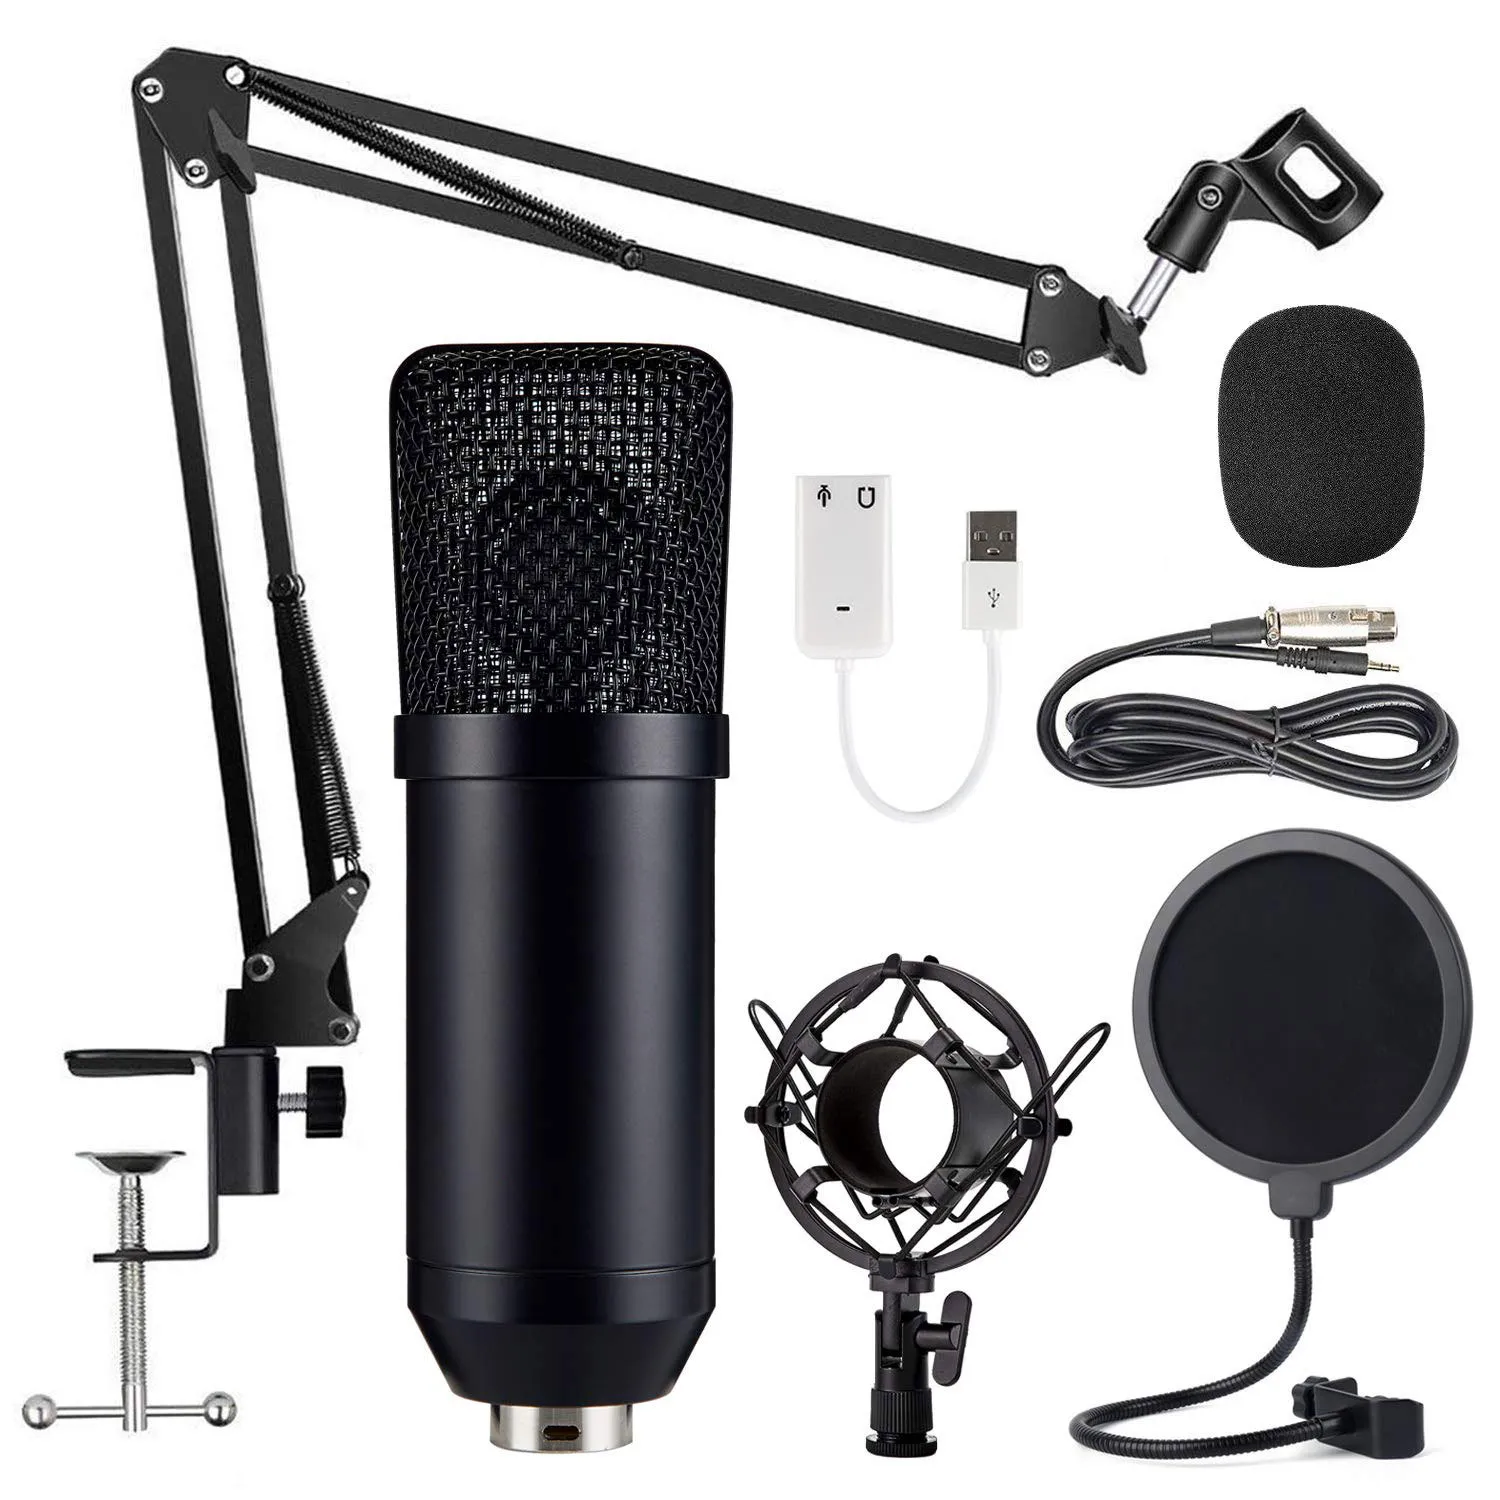 Professional XLR Condenser Studio Microphone Set Kit With 3.5mm Plug And  Mic Stand BM 700 For Studio Recording And Computer Use In Black From  Yue003, $49.75